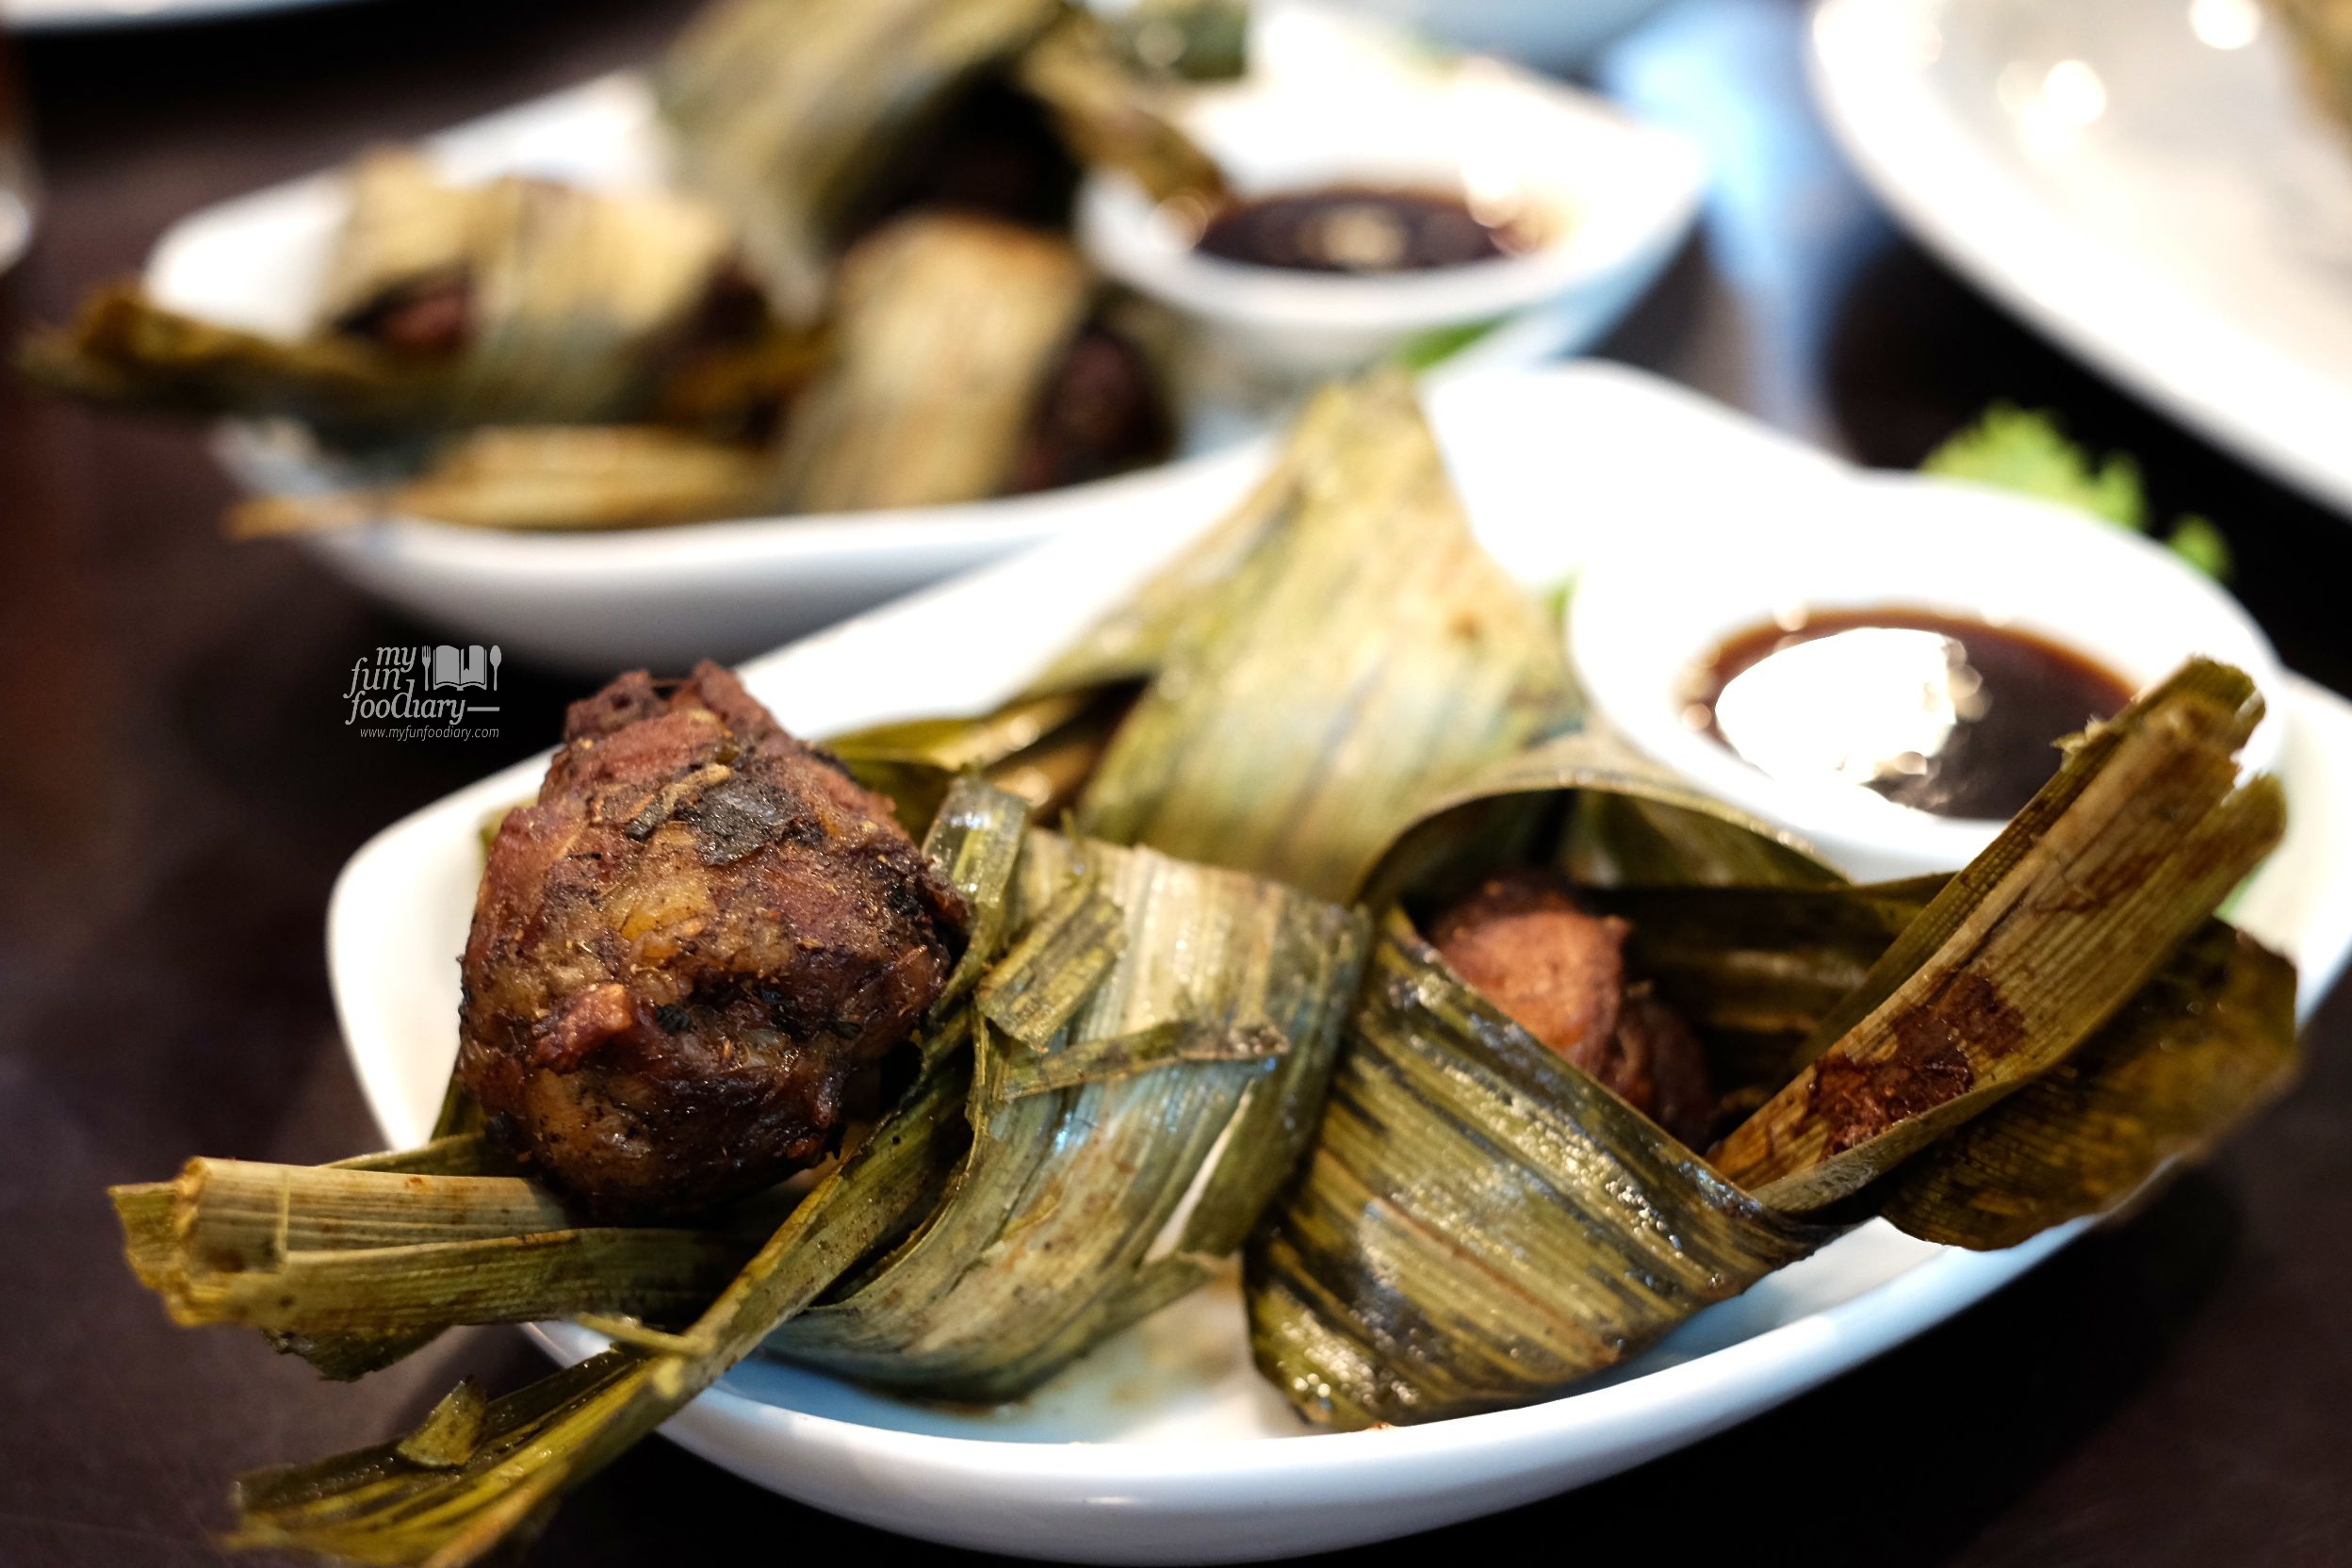 Fried Chicken in Pandan Leaf at Thai Chada by Myfunfoodiary